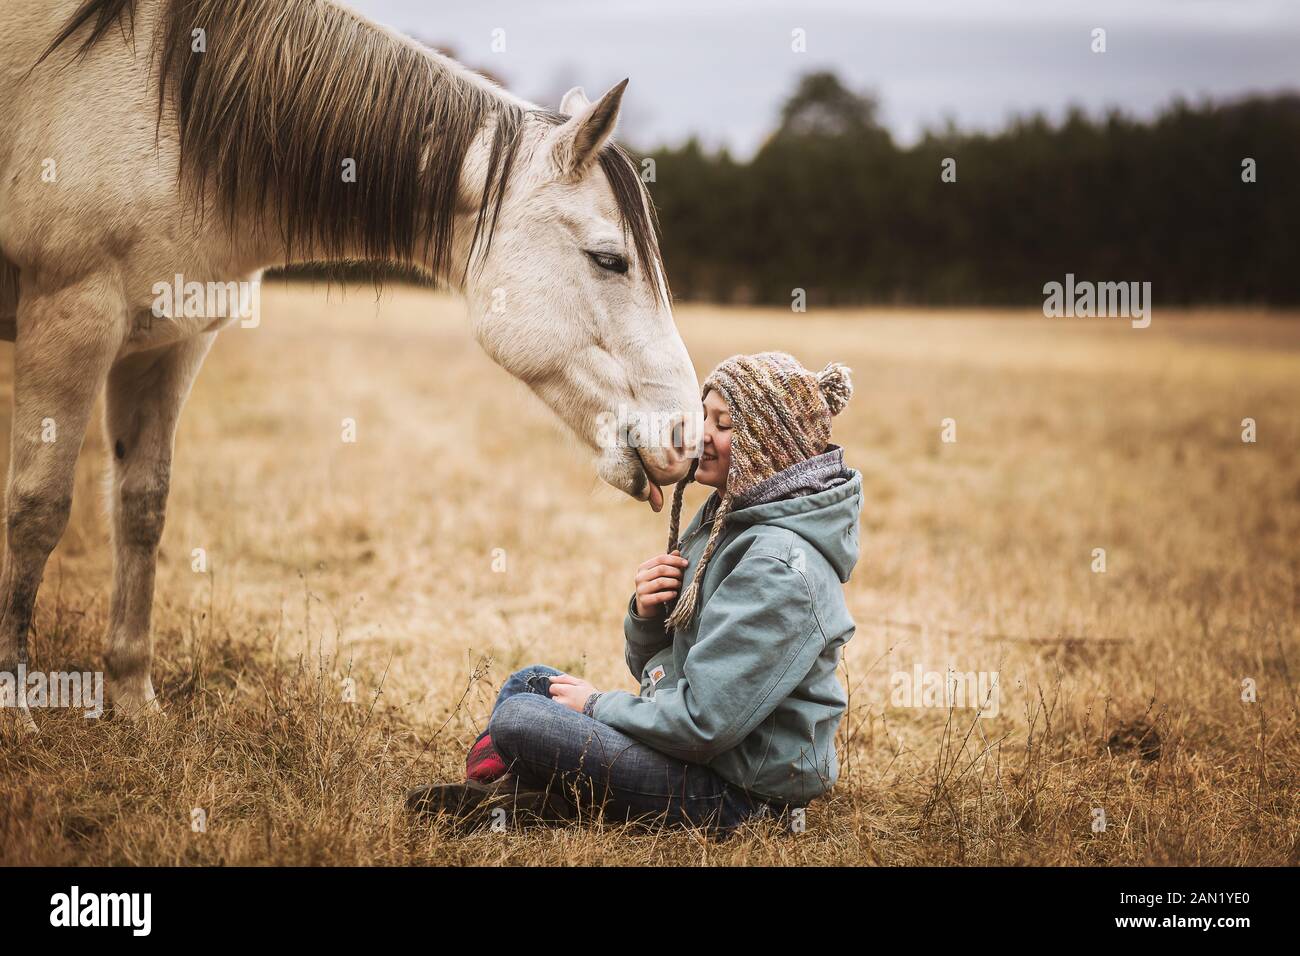 Happy horse licking young girls face in a field in the fall Stock Photo